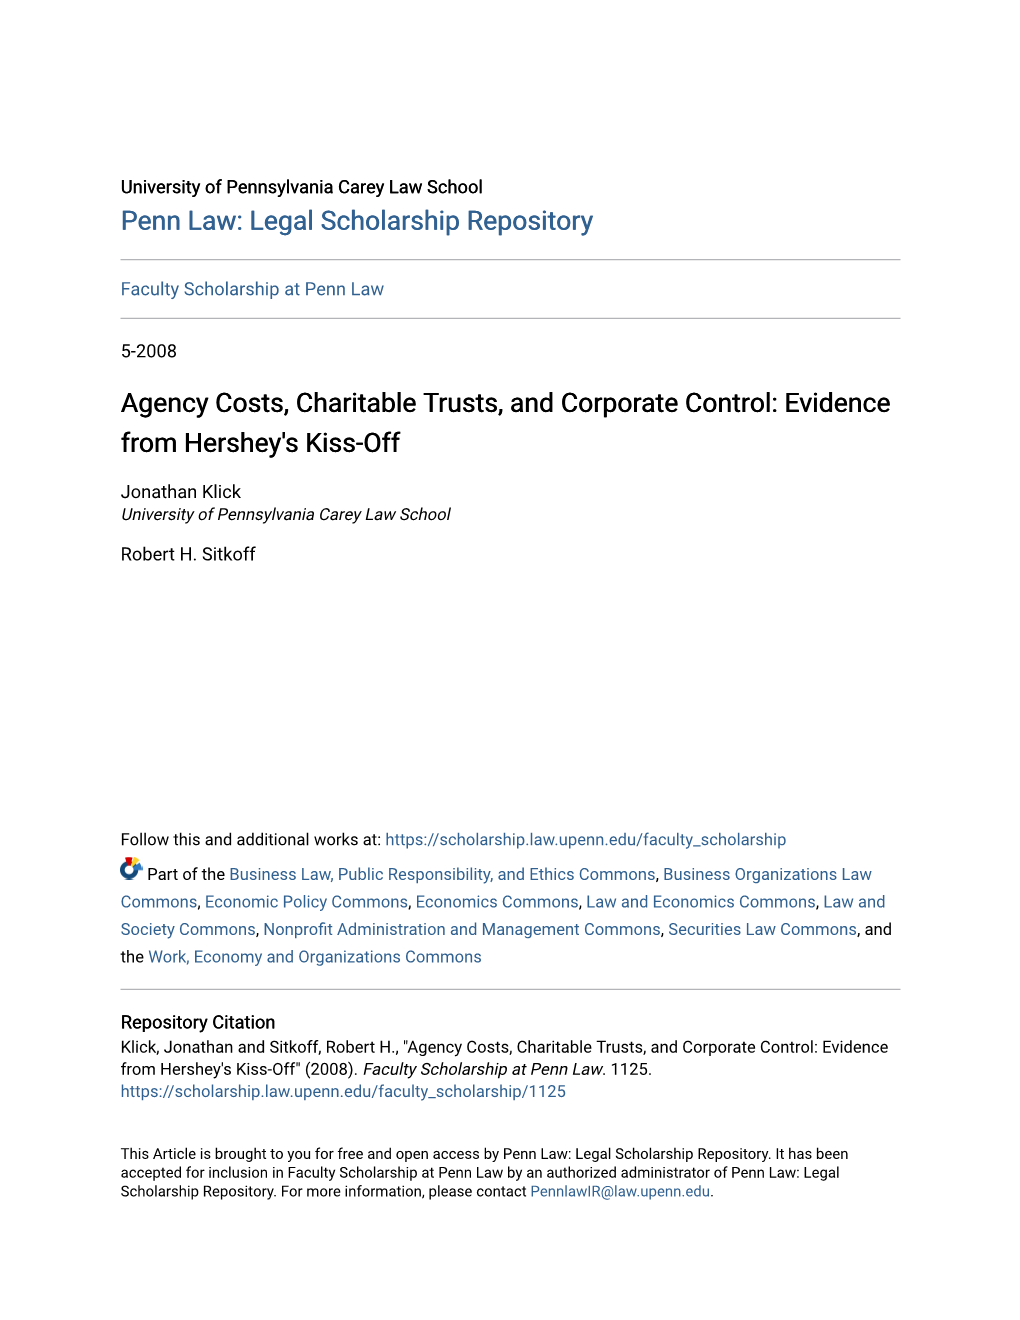 Agency Costs, Charitable Trusts, and Corporate Control: Evidence from Hershey's Kiss-Off